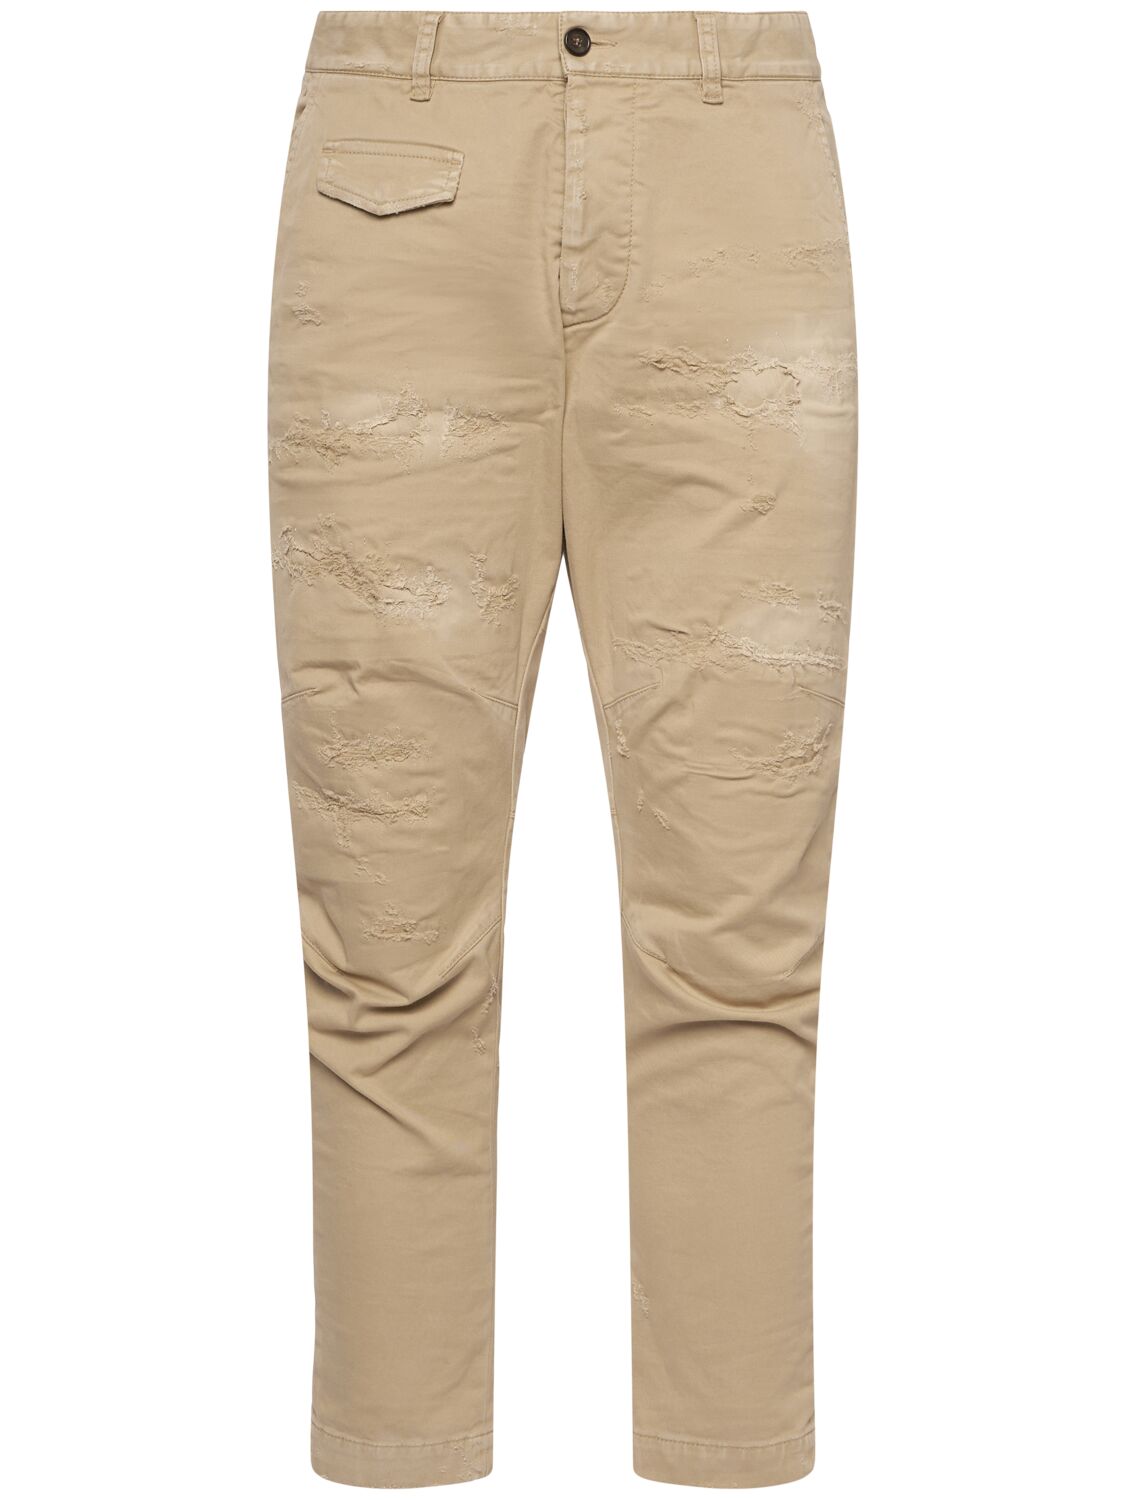 Ripped Sexy Cotton Blend Cargo Pants